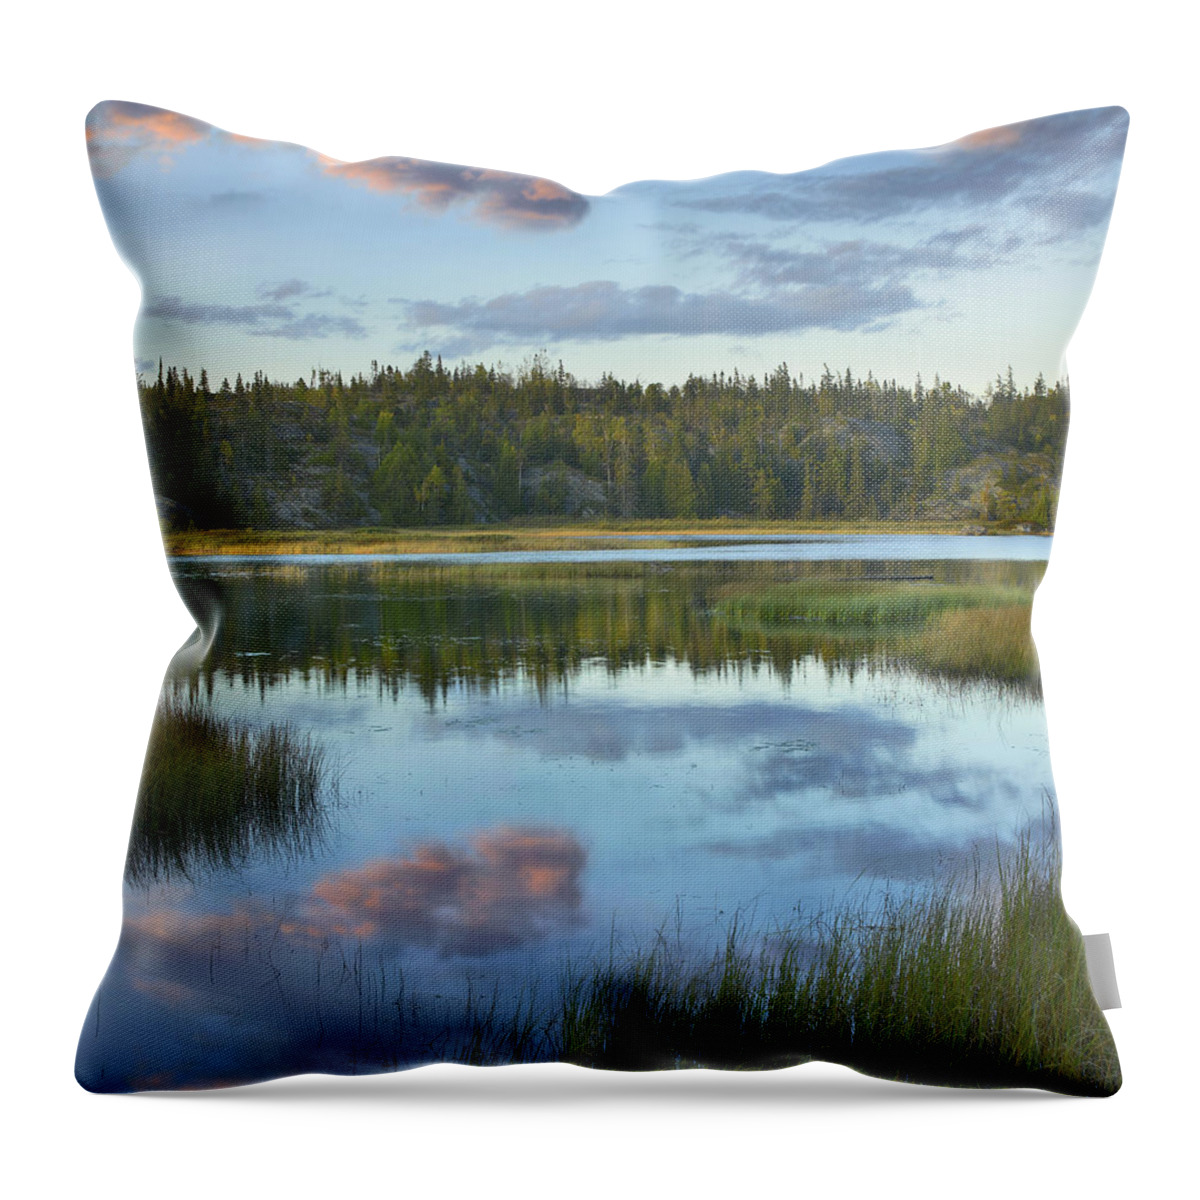 Feb0514 Throw Pillow featuring the photograph Halfway Lake Pukaskwa Np Ontario by Tim Fitzharris